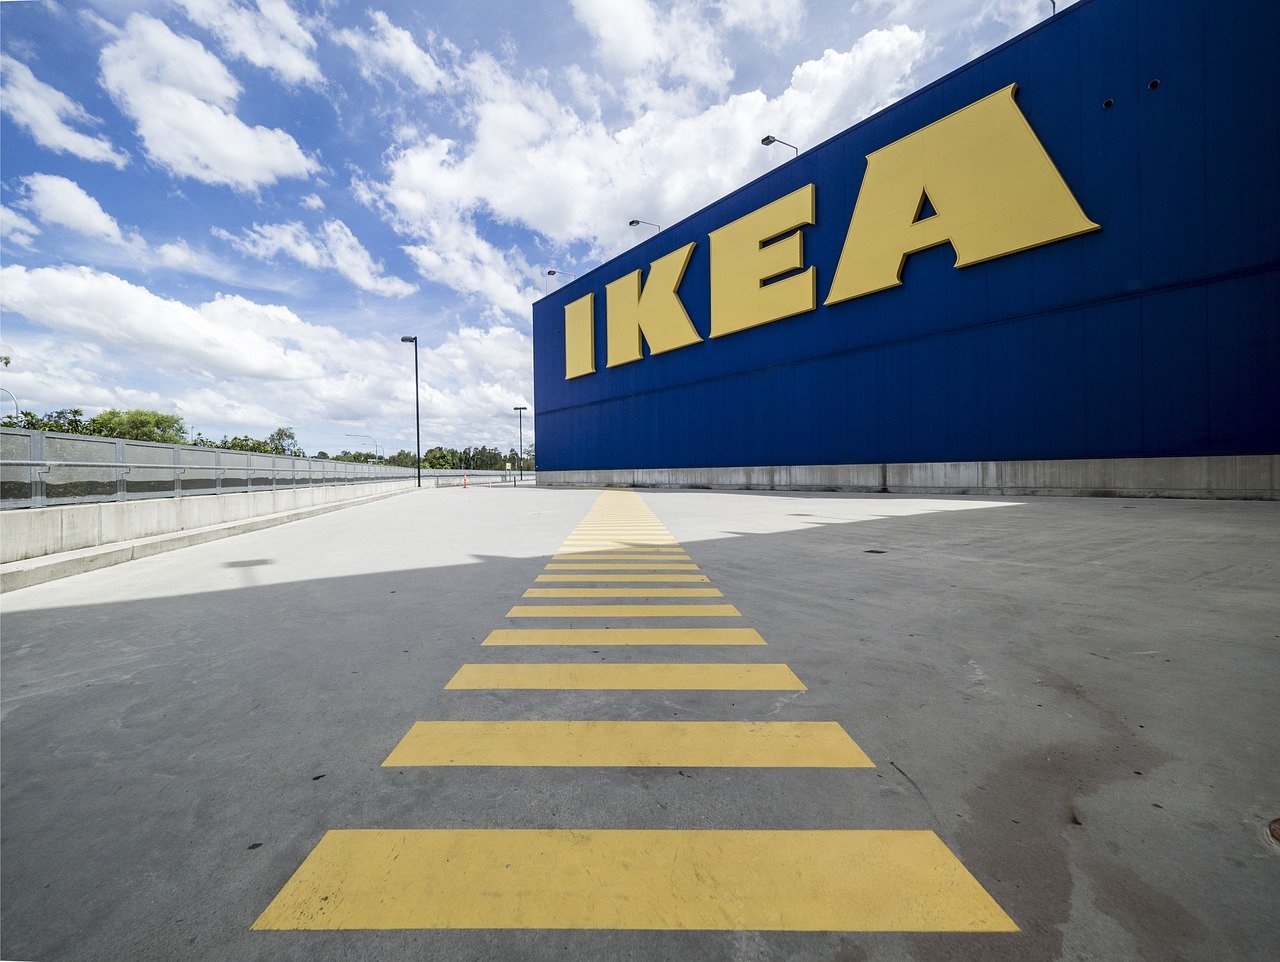 30 thoughts I had while shopping at Ikea